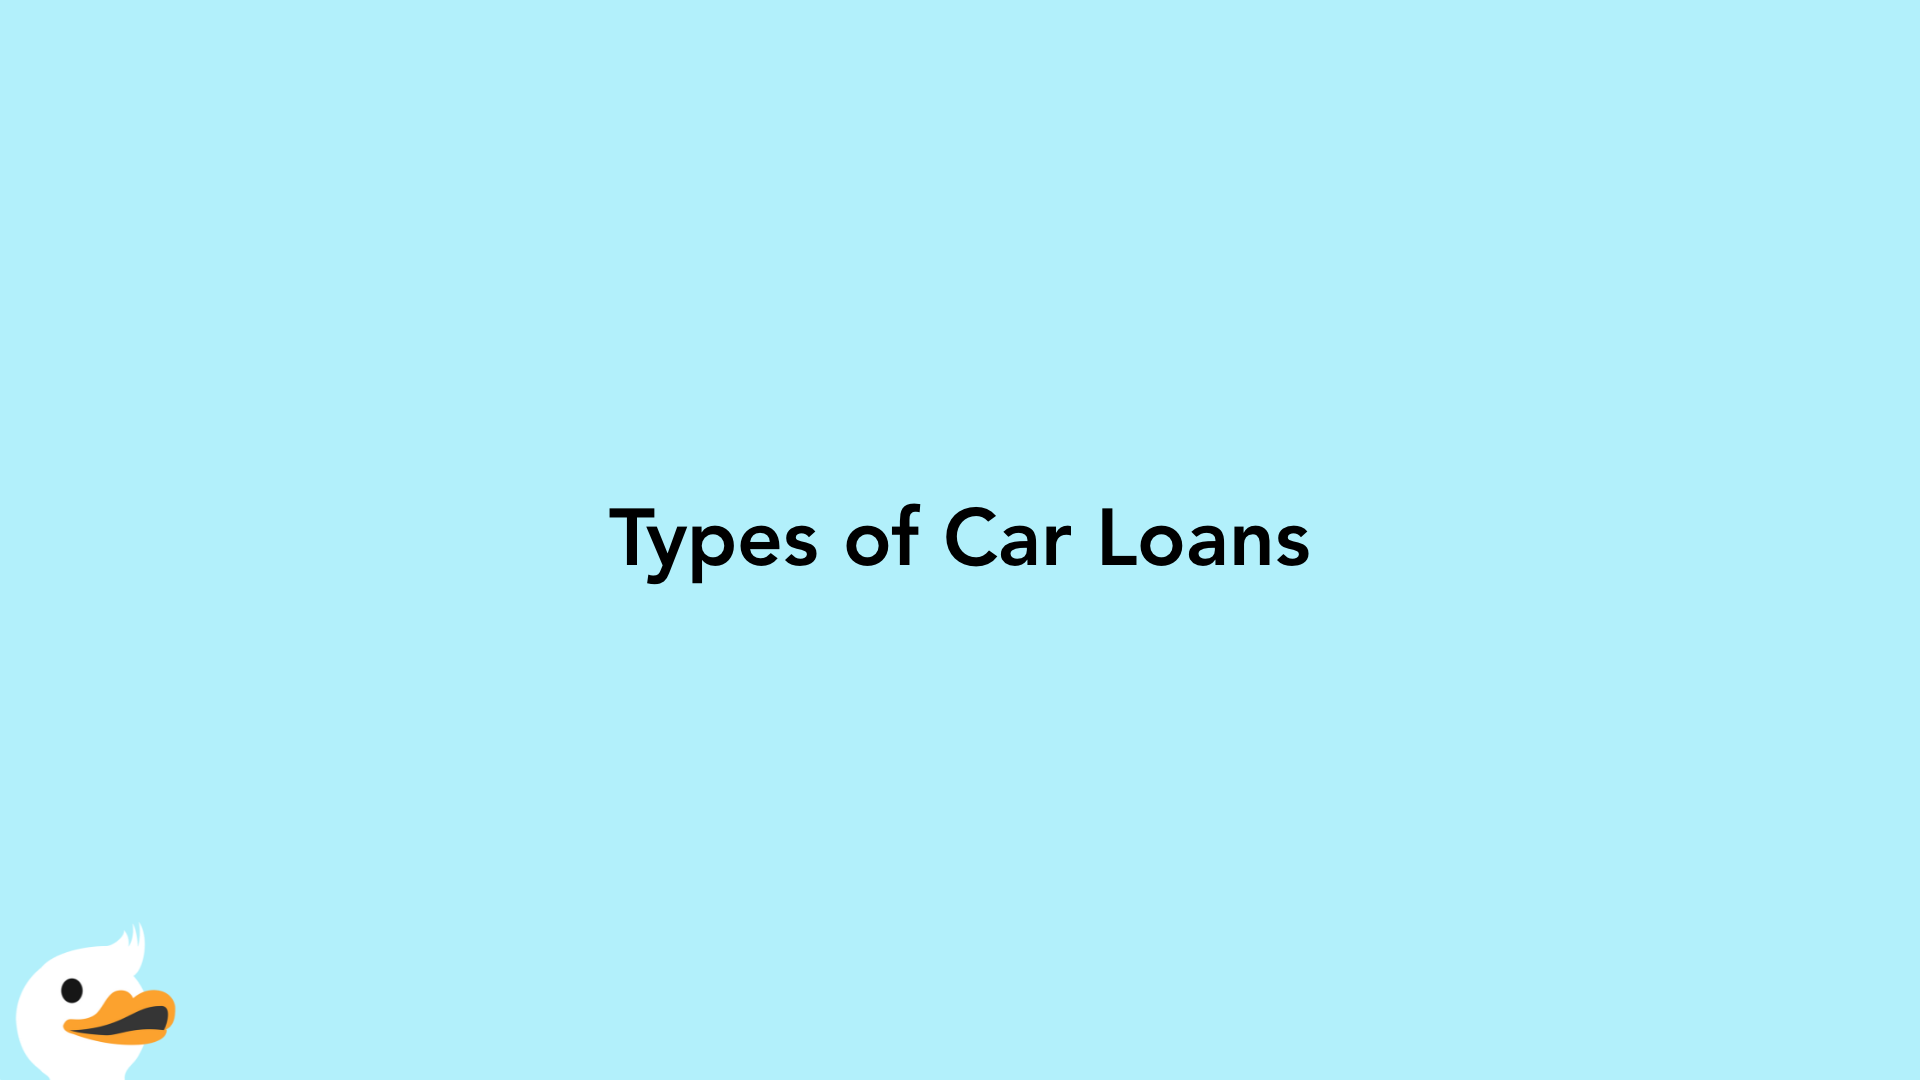 Types of Car Loans